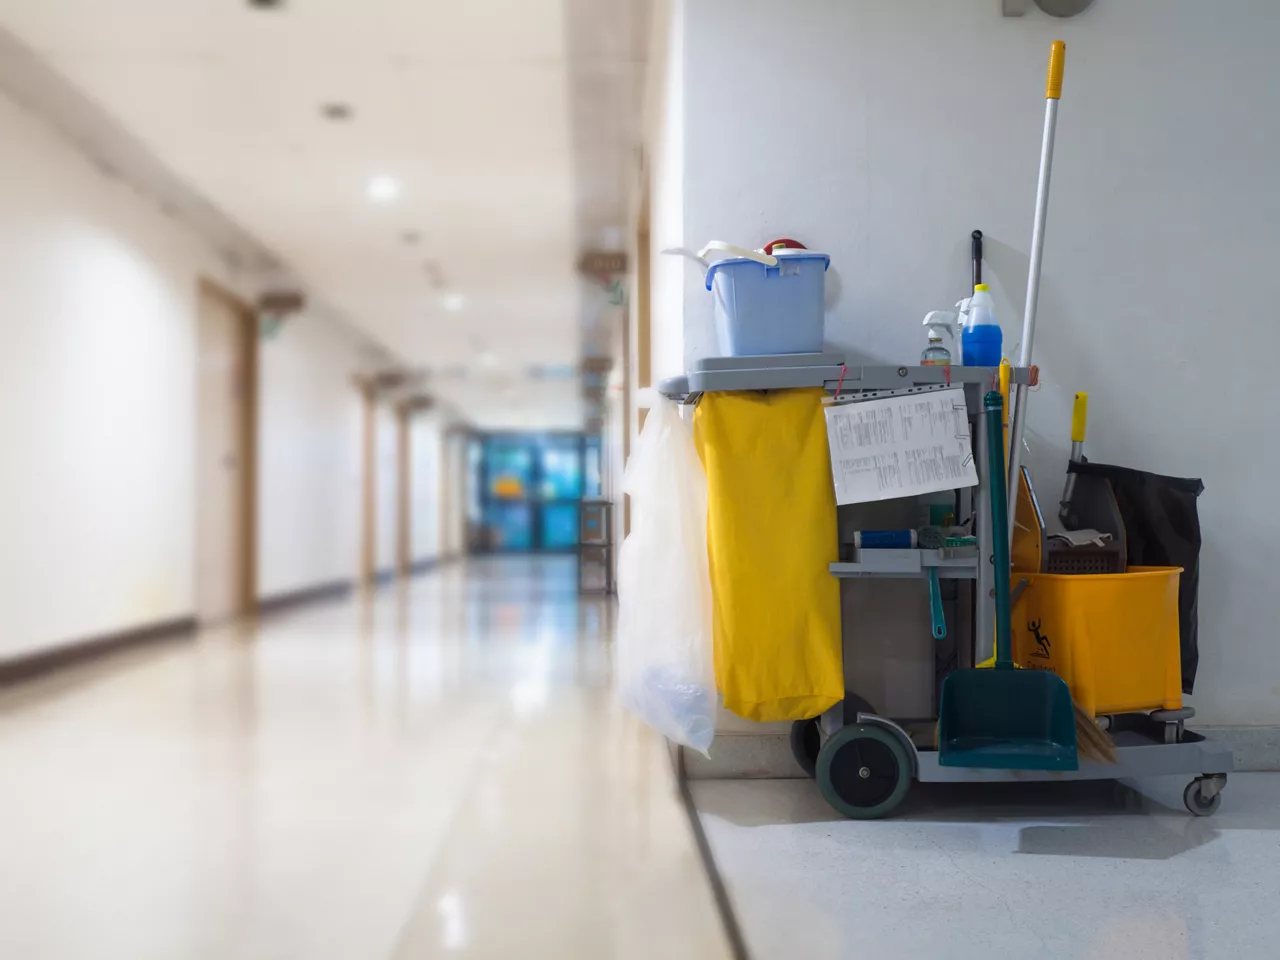 Cleaning tools cart in a hospital hallway